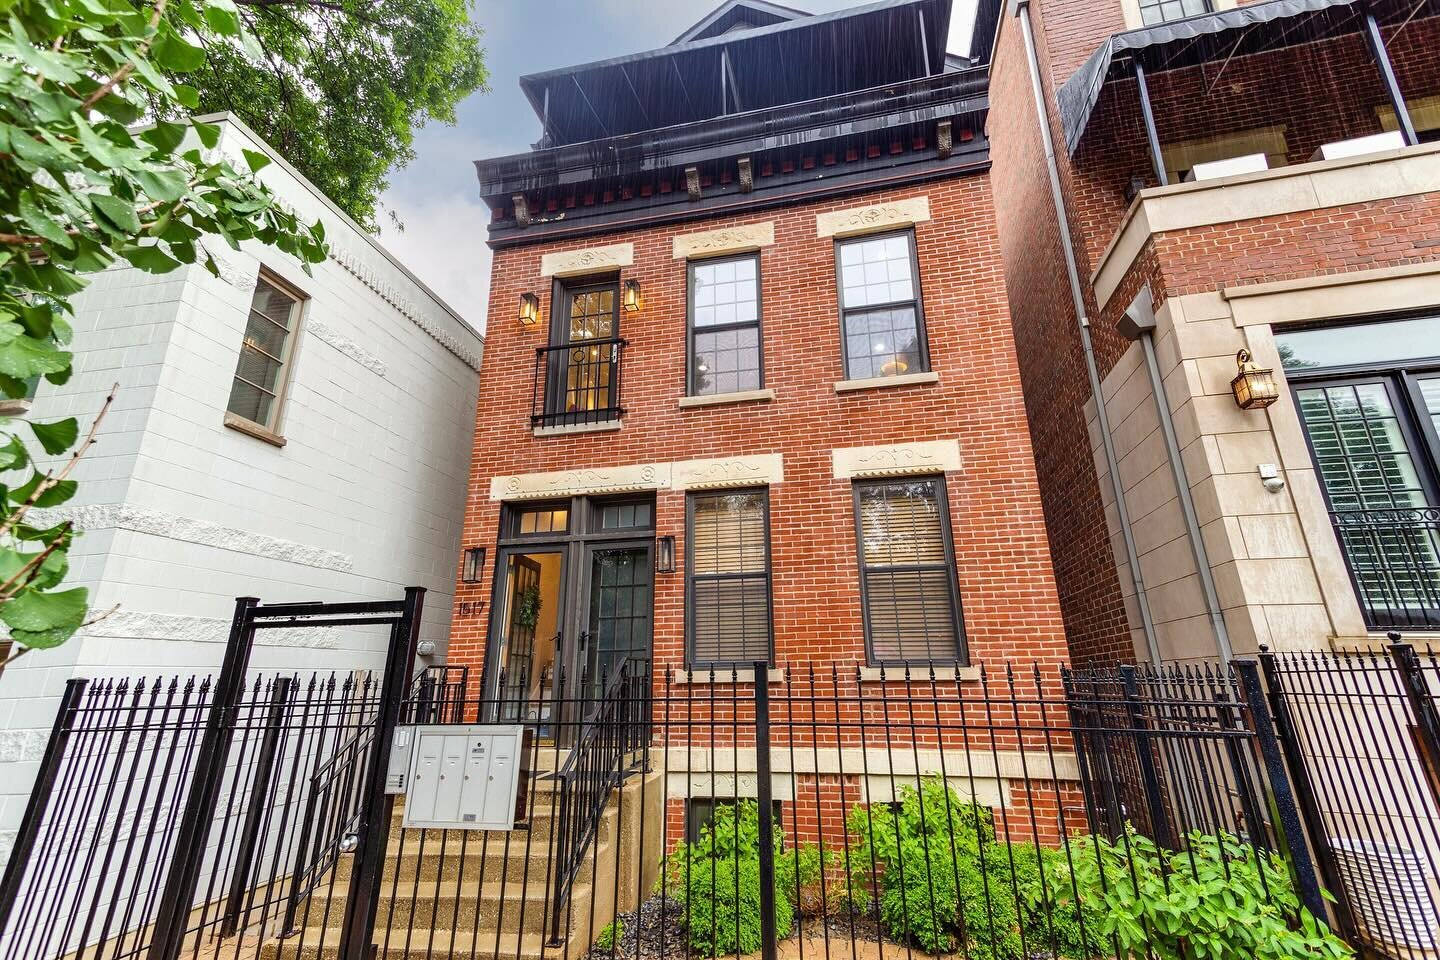 JUST LISTED!

1517 N North Park Avenue

$1,950,000

Incredible four-unit building, fully updated and rehabbed in 2017 in prime Old Town. The top duplex-up unit occupies the floors two and three with high end finishes, great light, multiple private ou